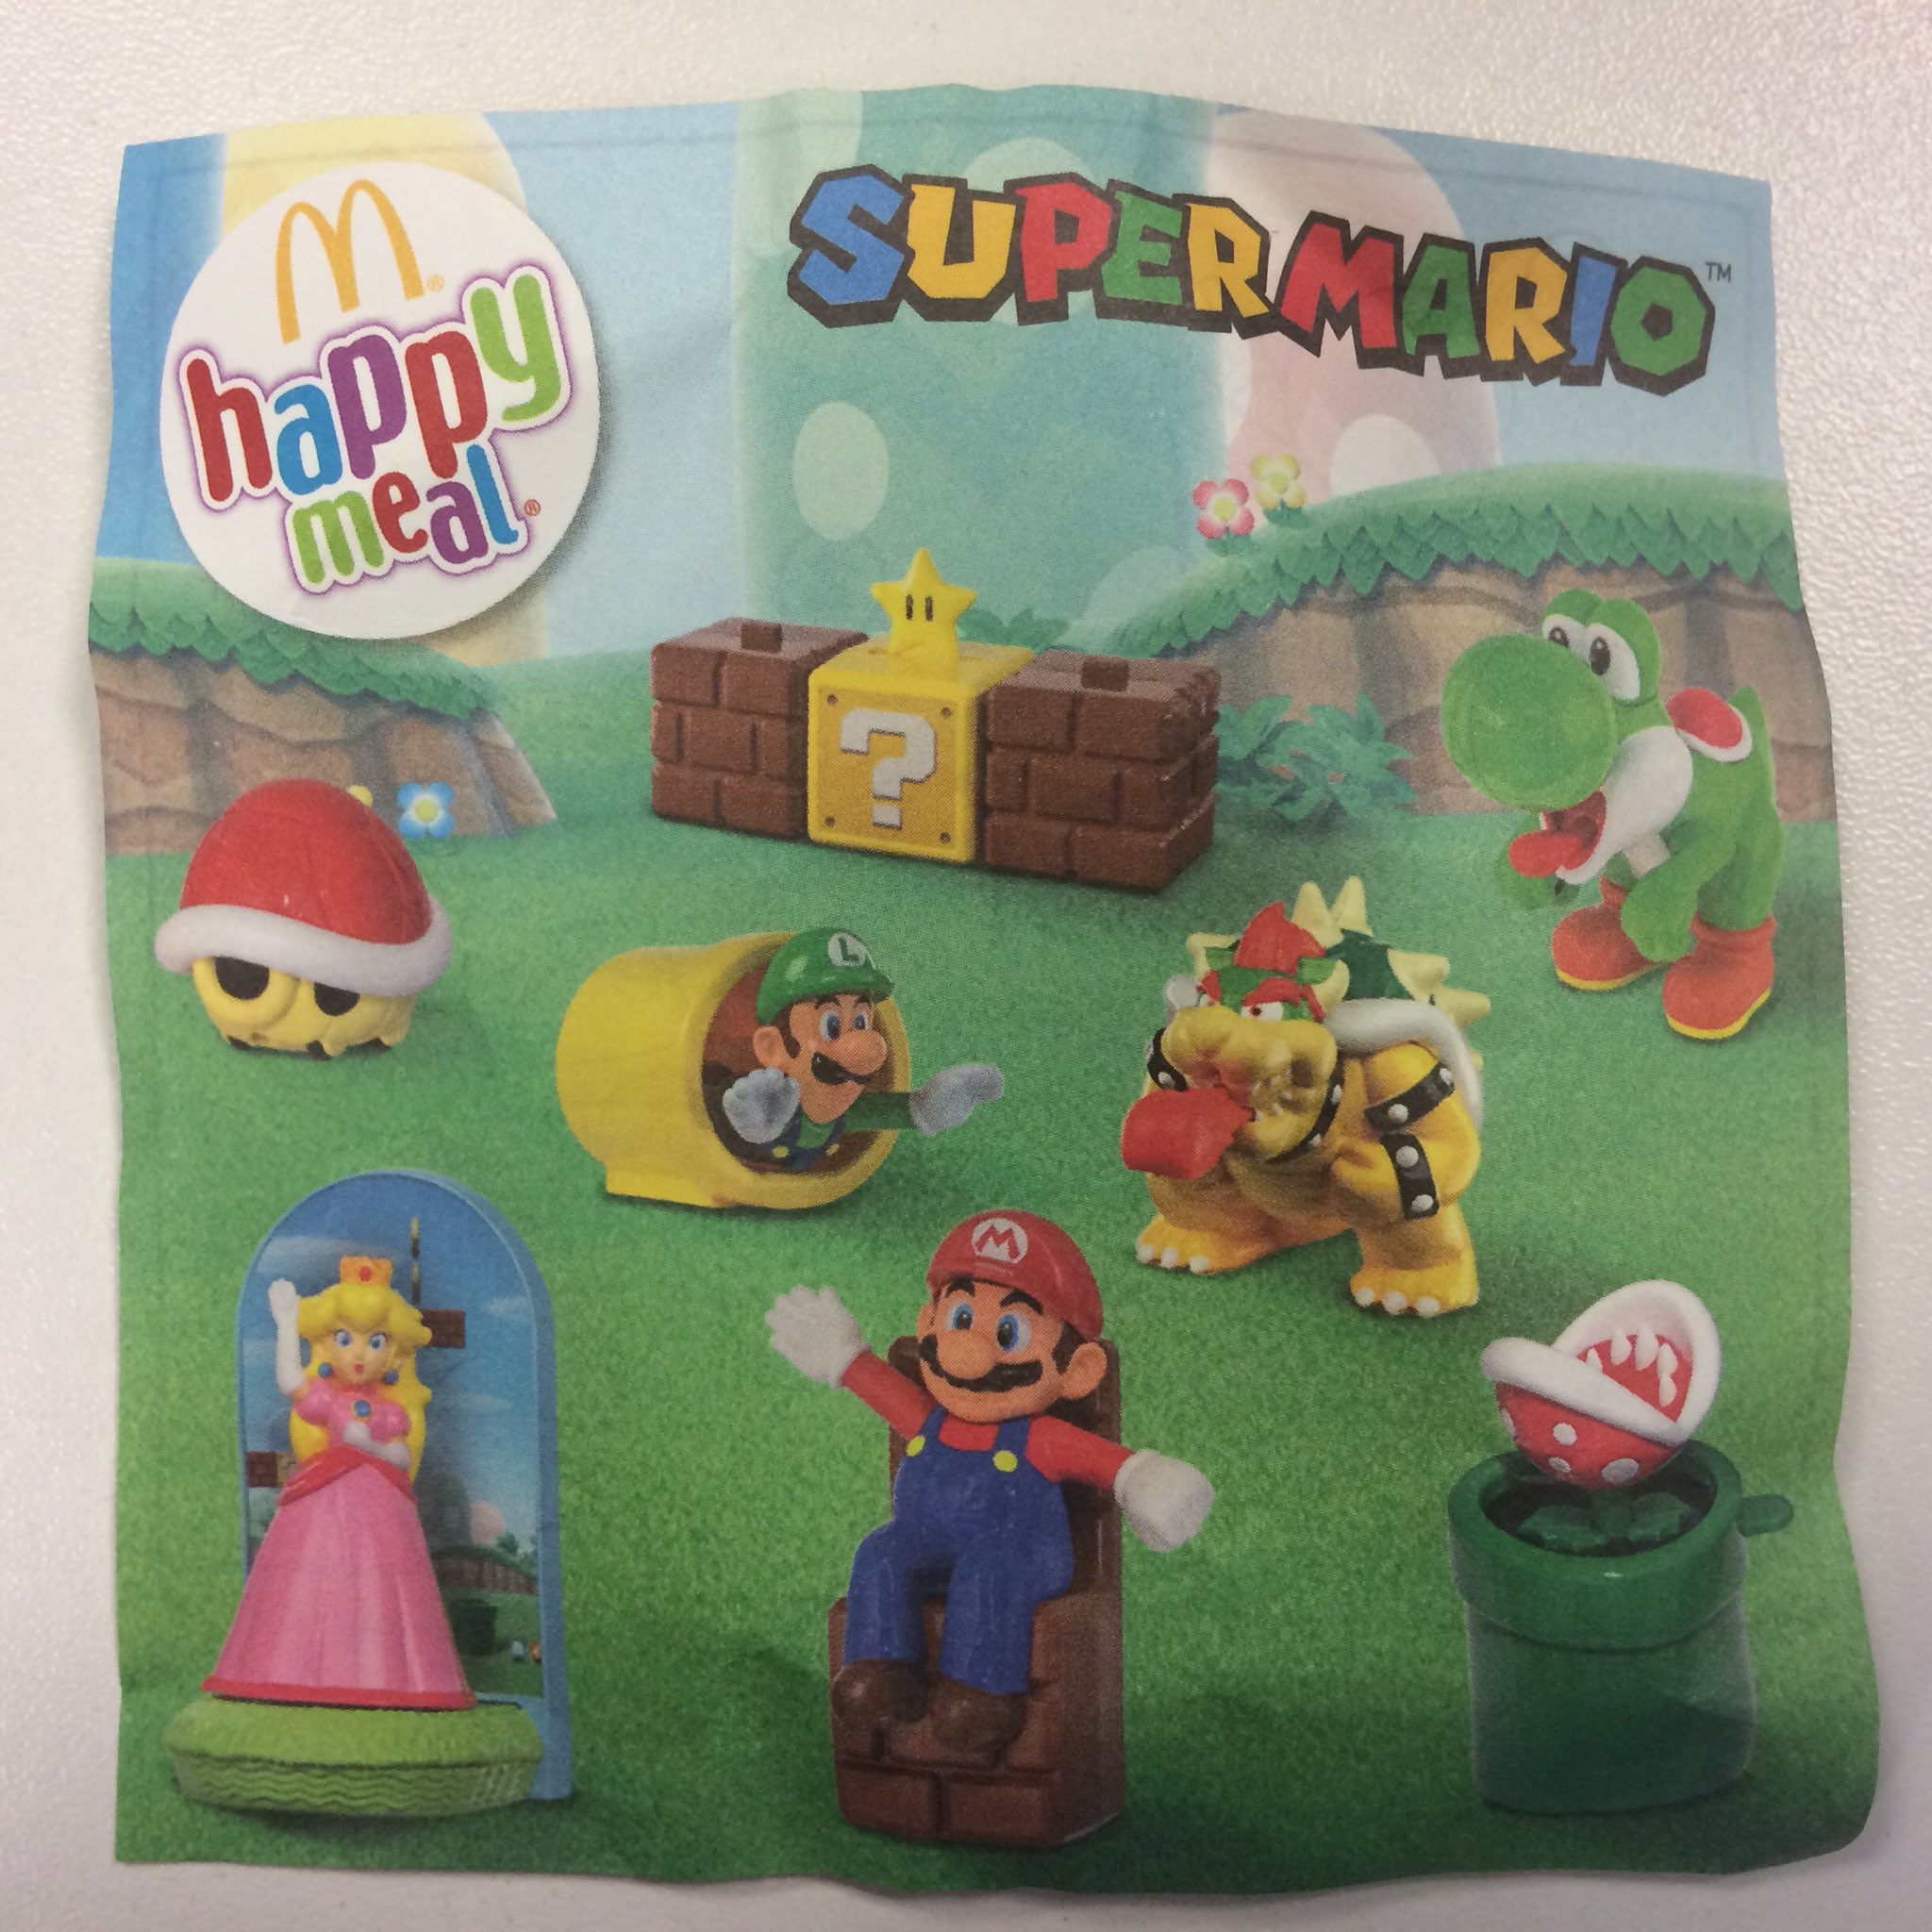 First look at new Super Mario McDonald's Happy Meal toys from UK